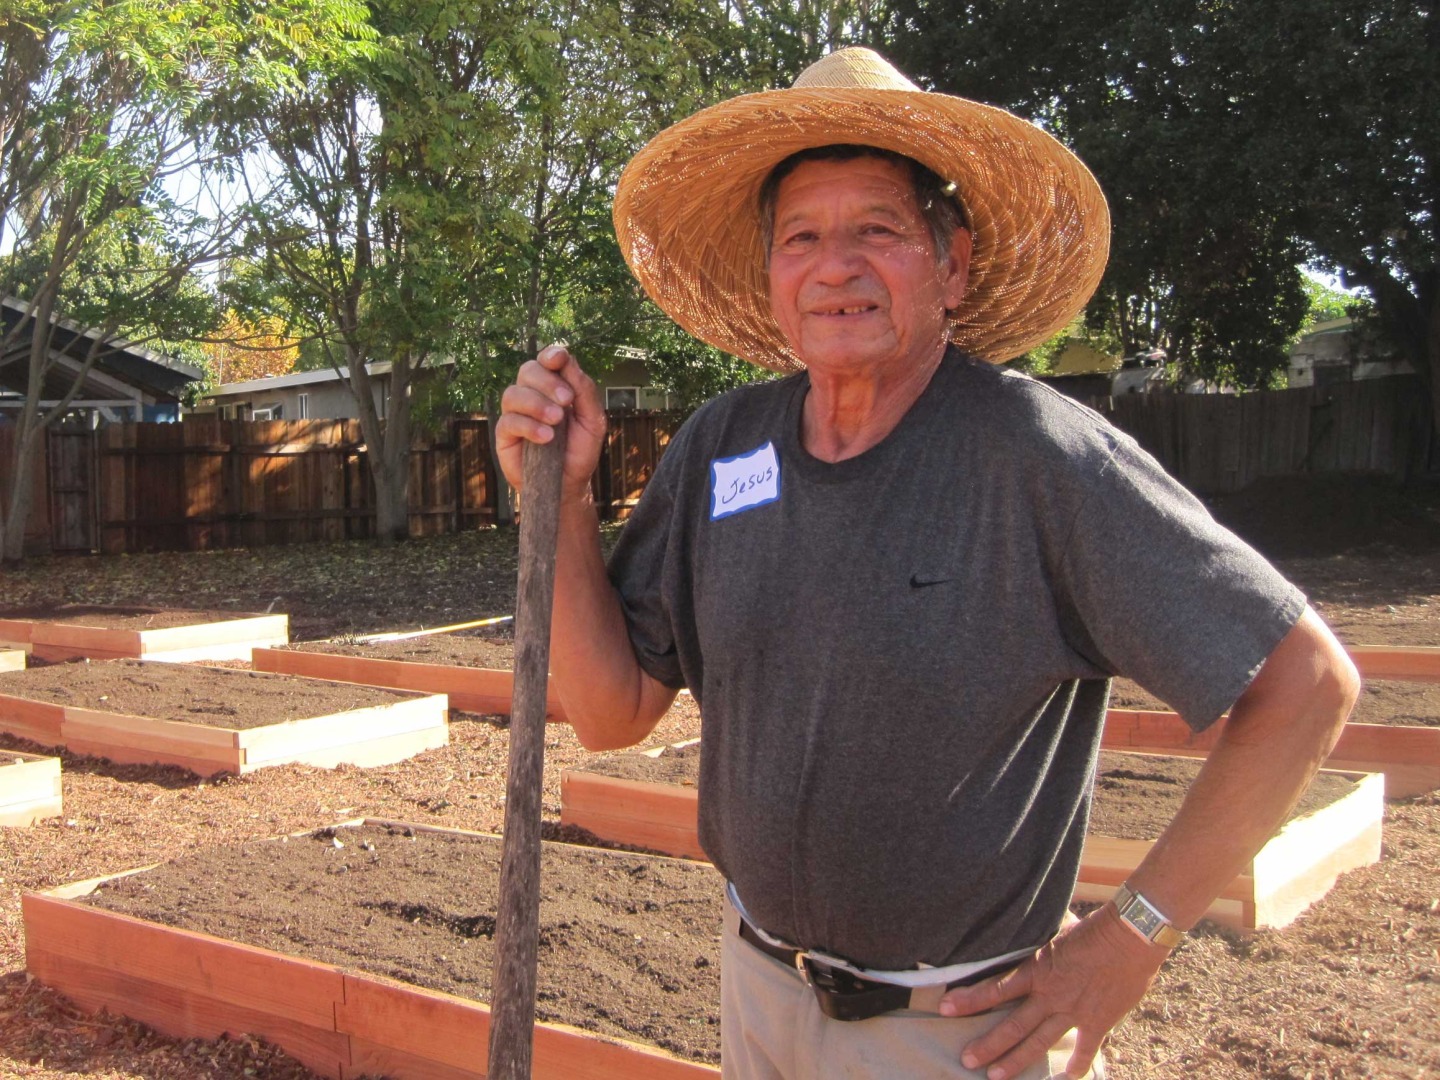 esus Becerra helps build Belle Haven’s first community garden on Nov. 8, 2014. The garden opened later in the month, and about 25 families gained access to raised beds and gardening classes on site. (Farida Jhabvala Romero/Peninsula Press)